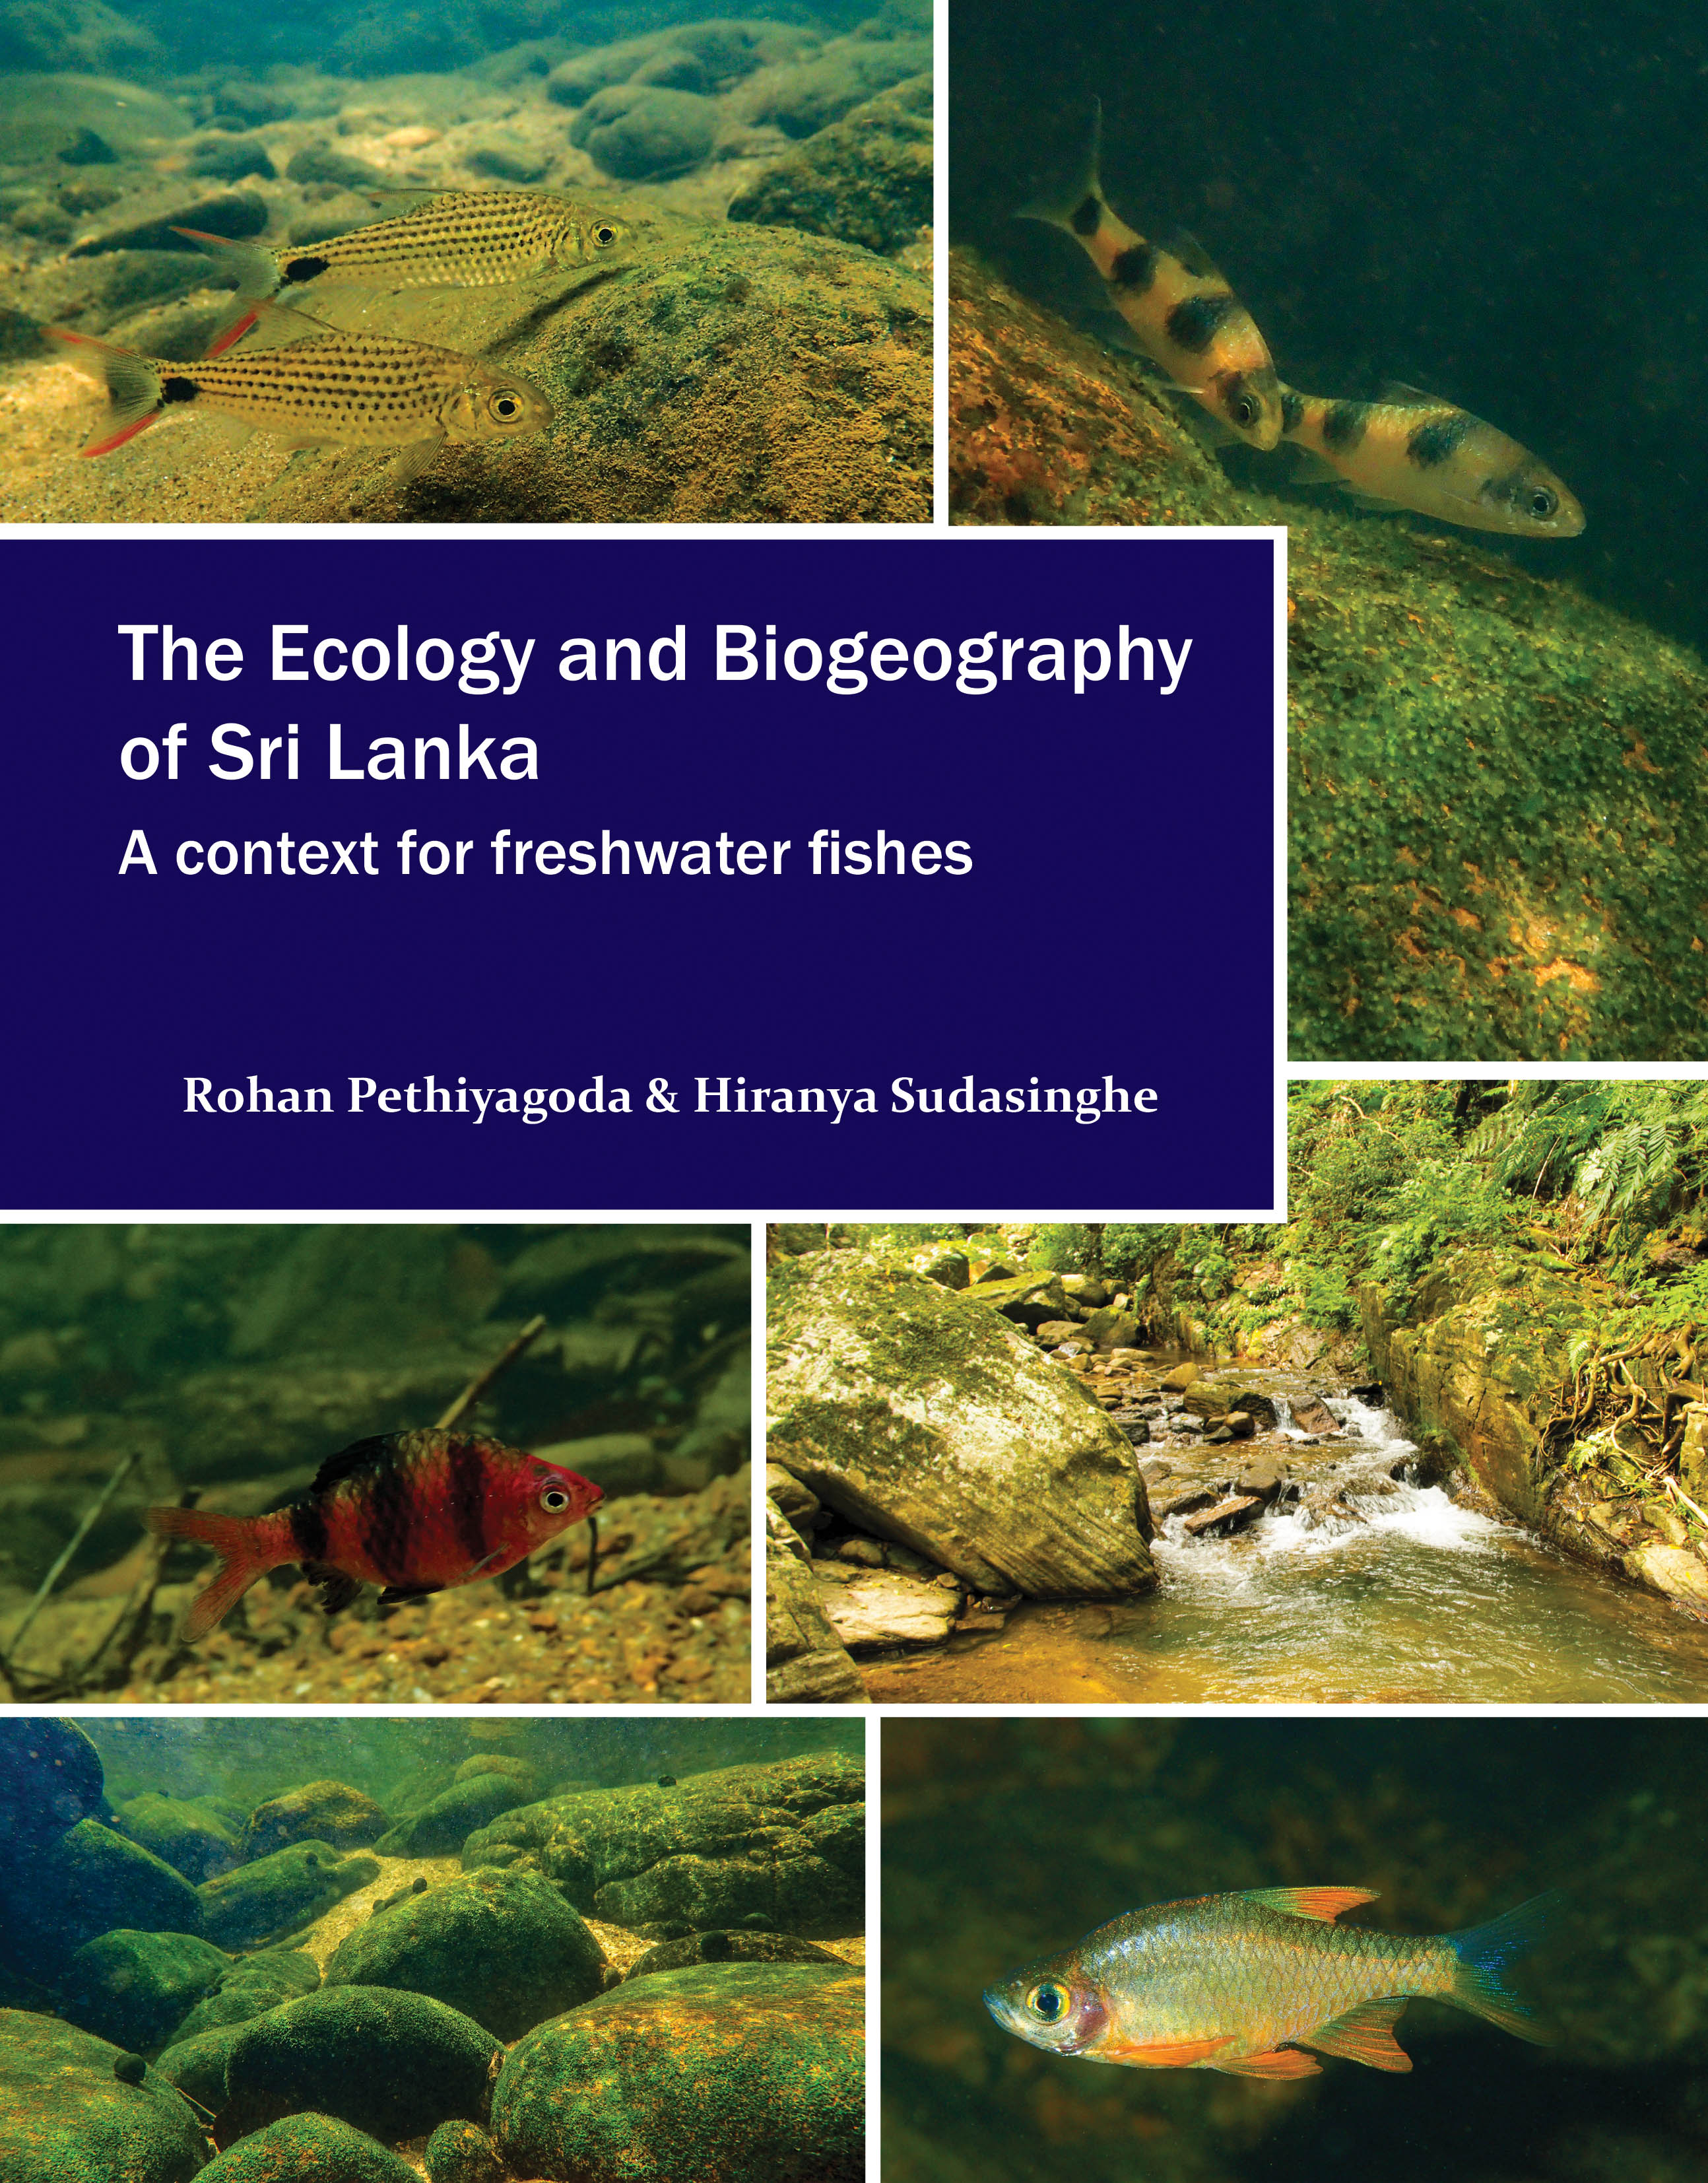 The Ecology and Biogeography of Sri Lanka: A context for freshwater fishes